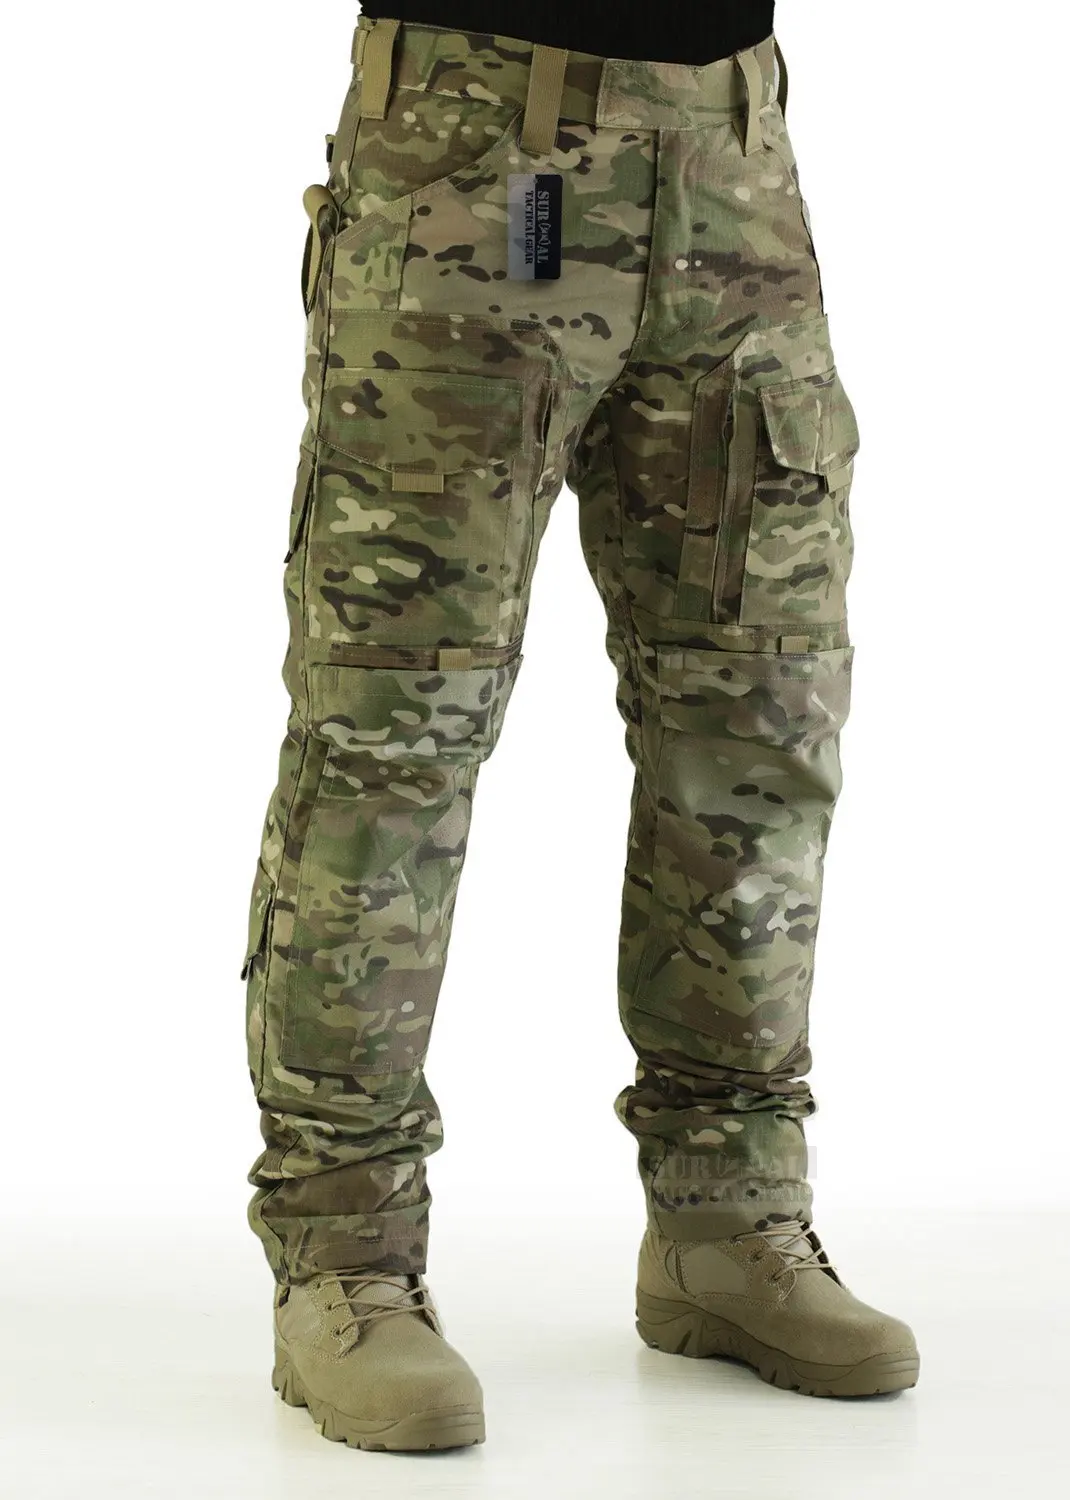 Buy ZAPT Tactical Molle Ripstop Combat Trousers Army Multicam/A-TACS LE